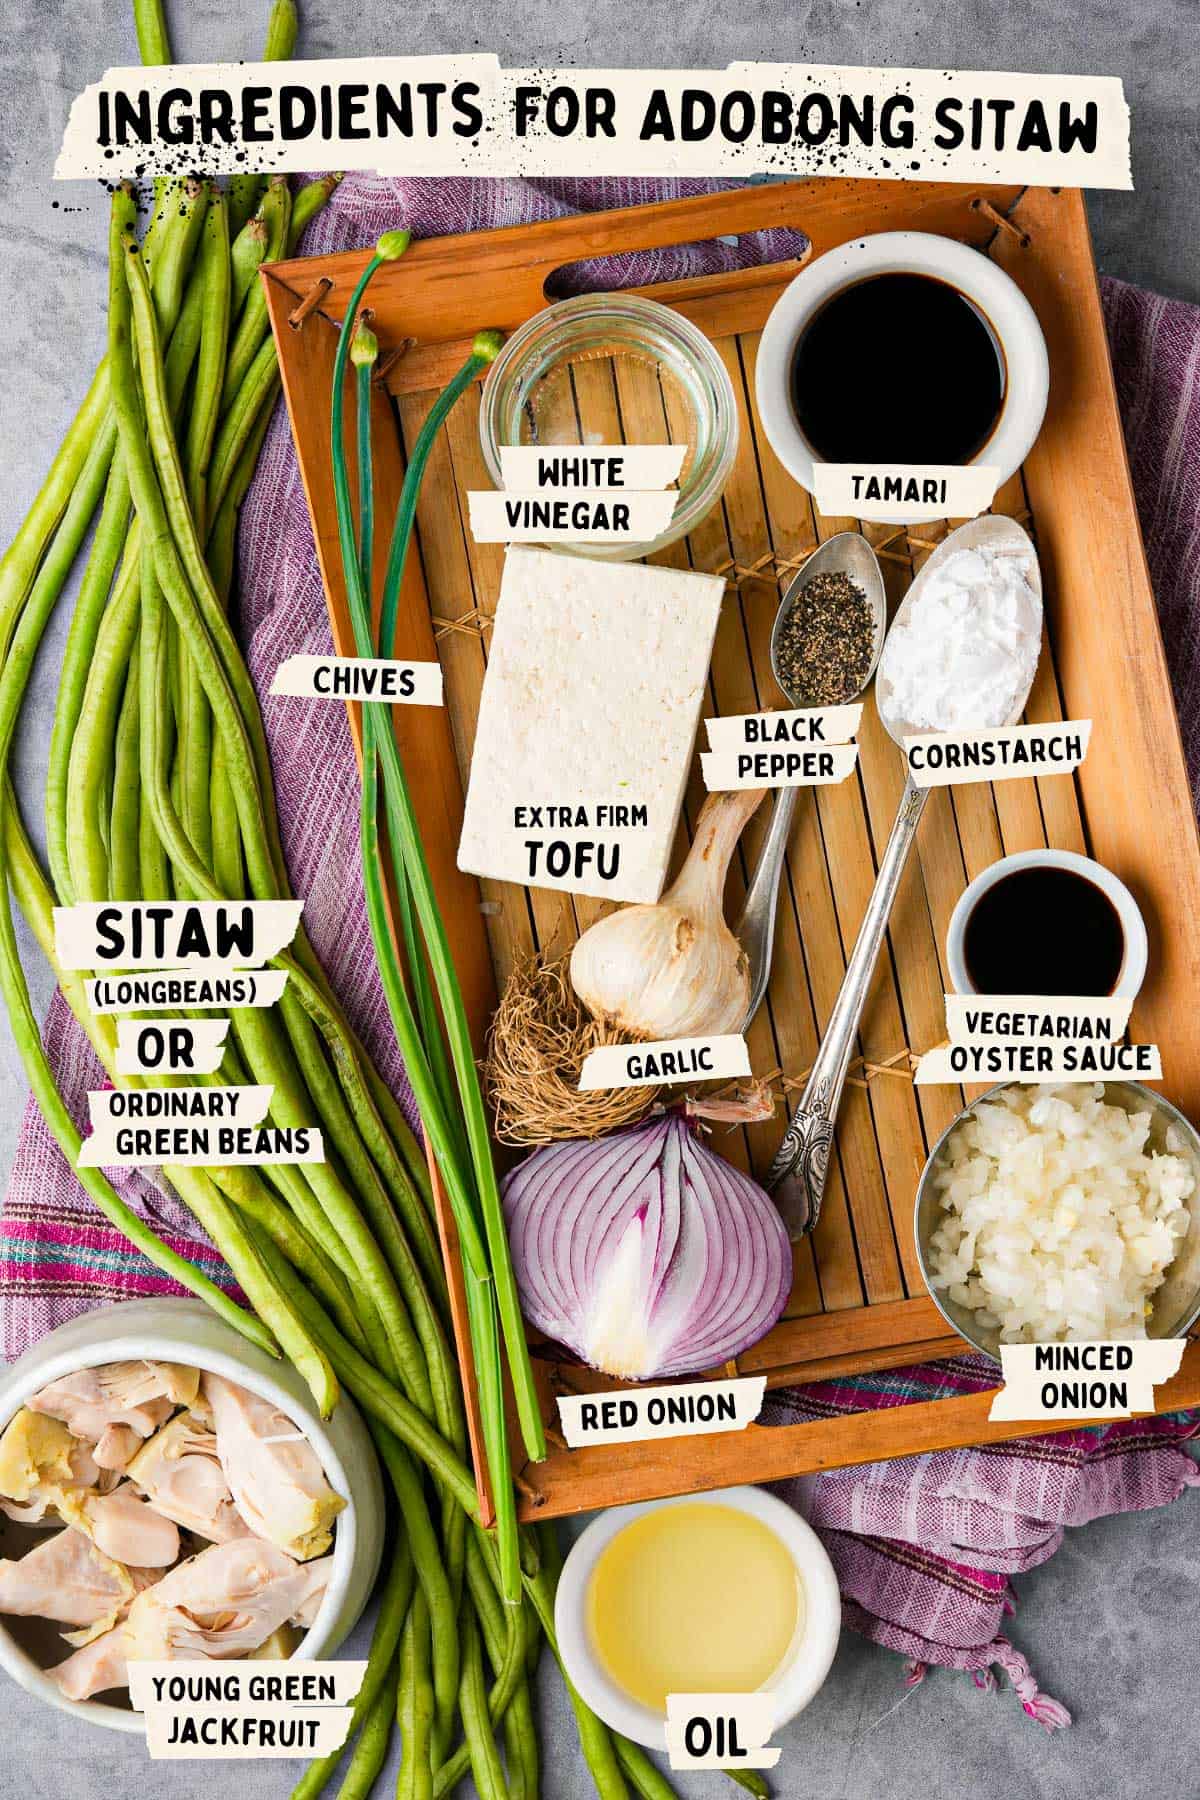 Ingredients for adobong sitaw laid out on a tray.